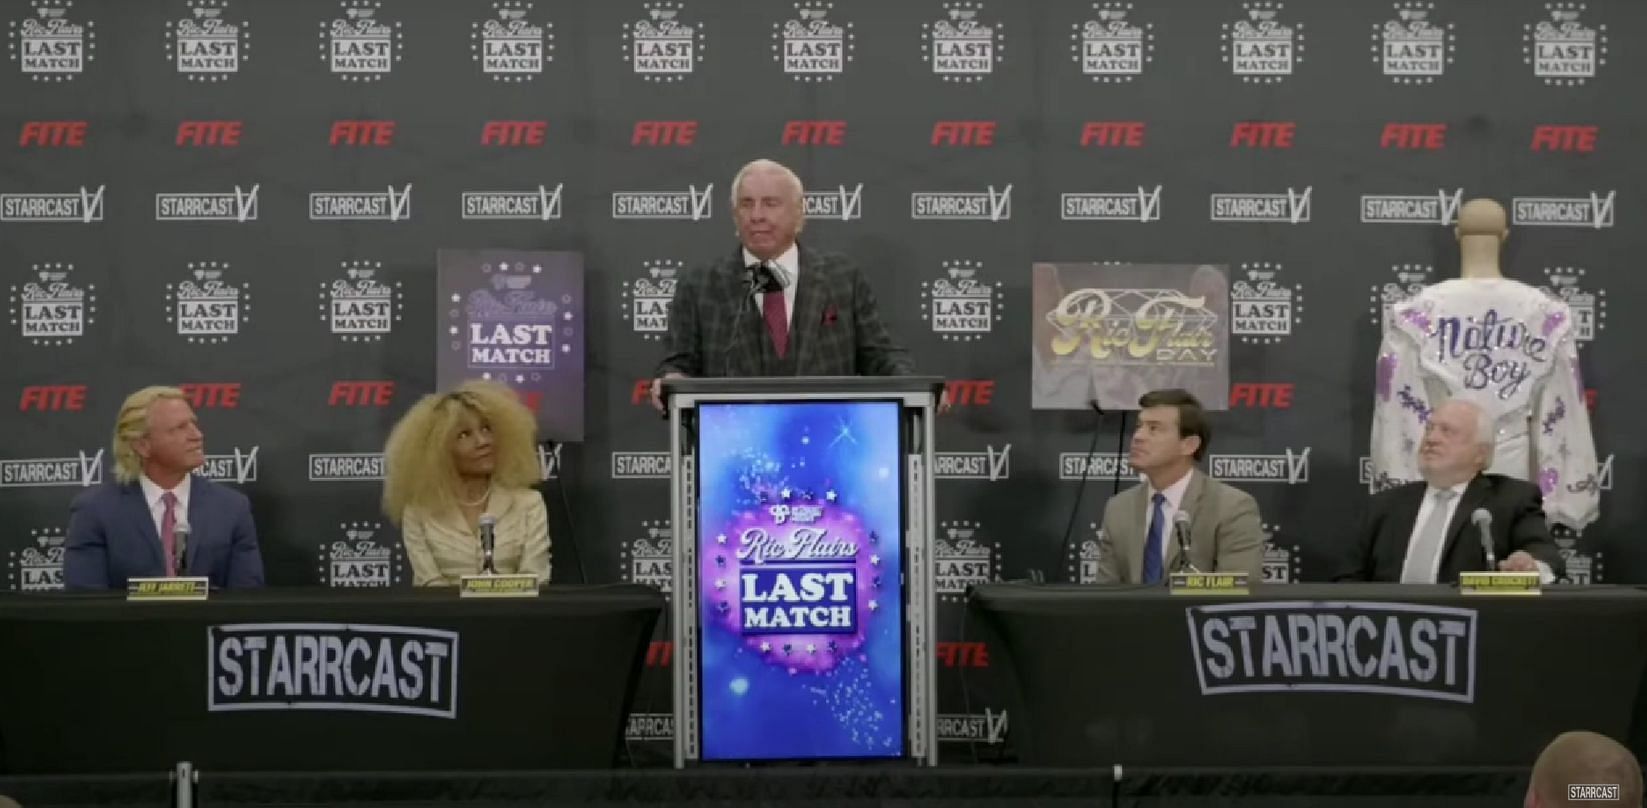 The 16-time world champion addressed the media at the Starrcast press conference